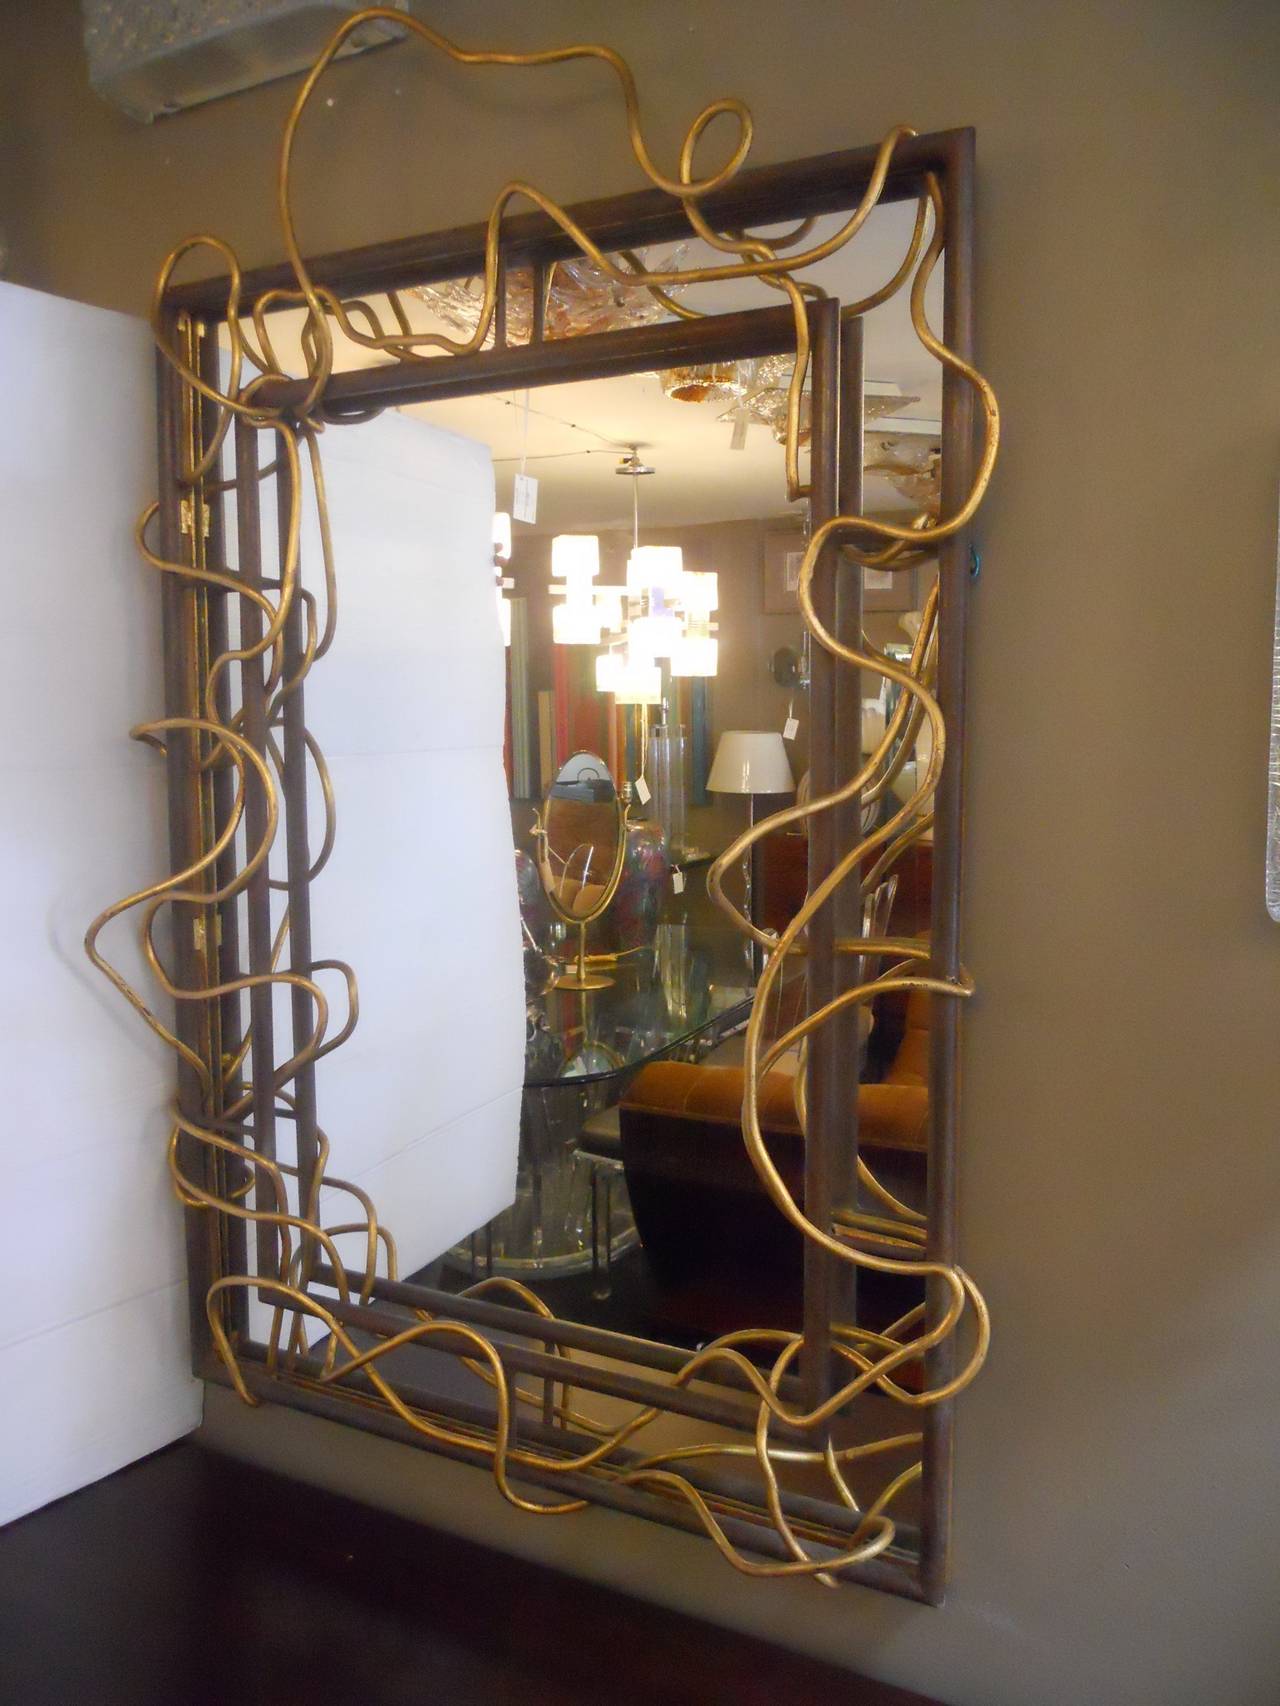 Substantial modernist mirror,
metal rusty patina and gold.